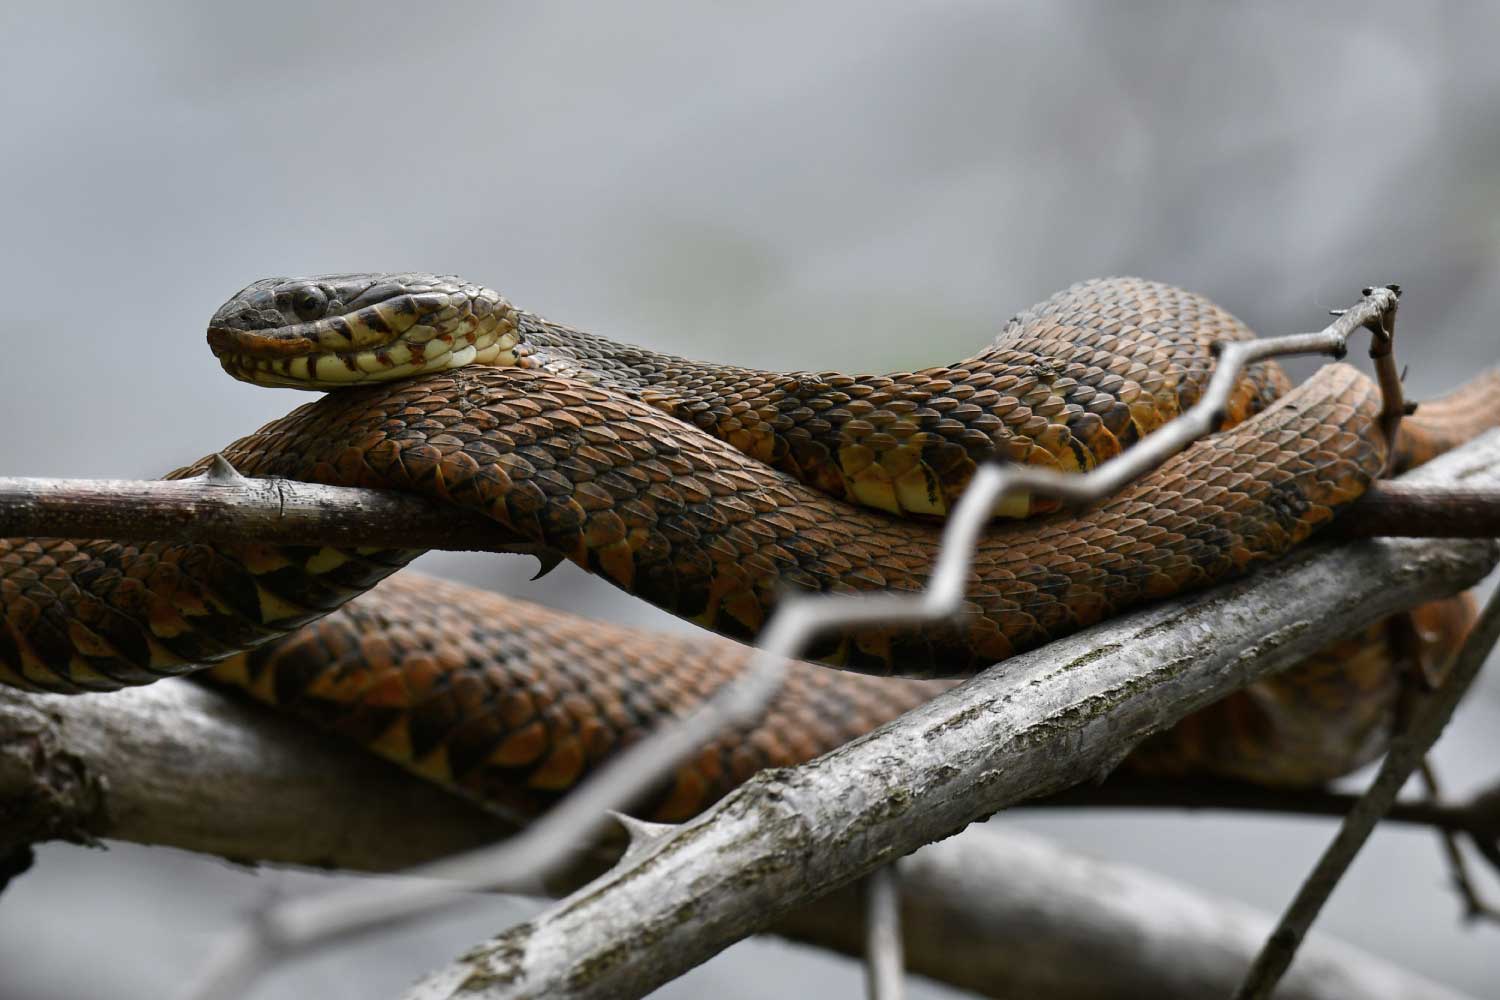 A northern water snake coiled on a tree branch